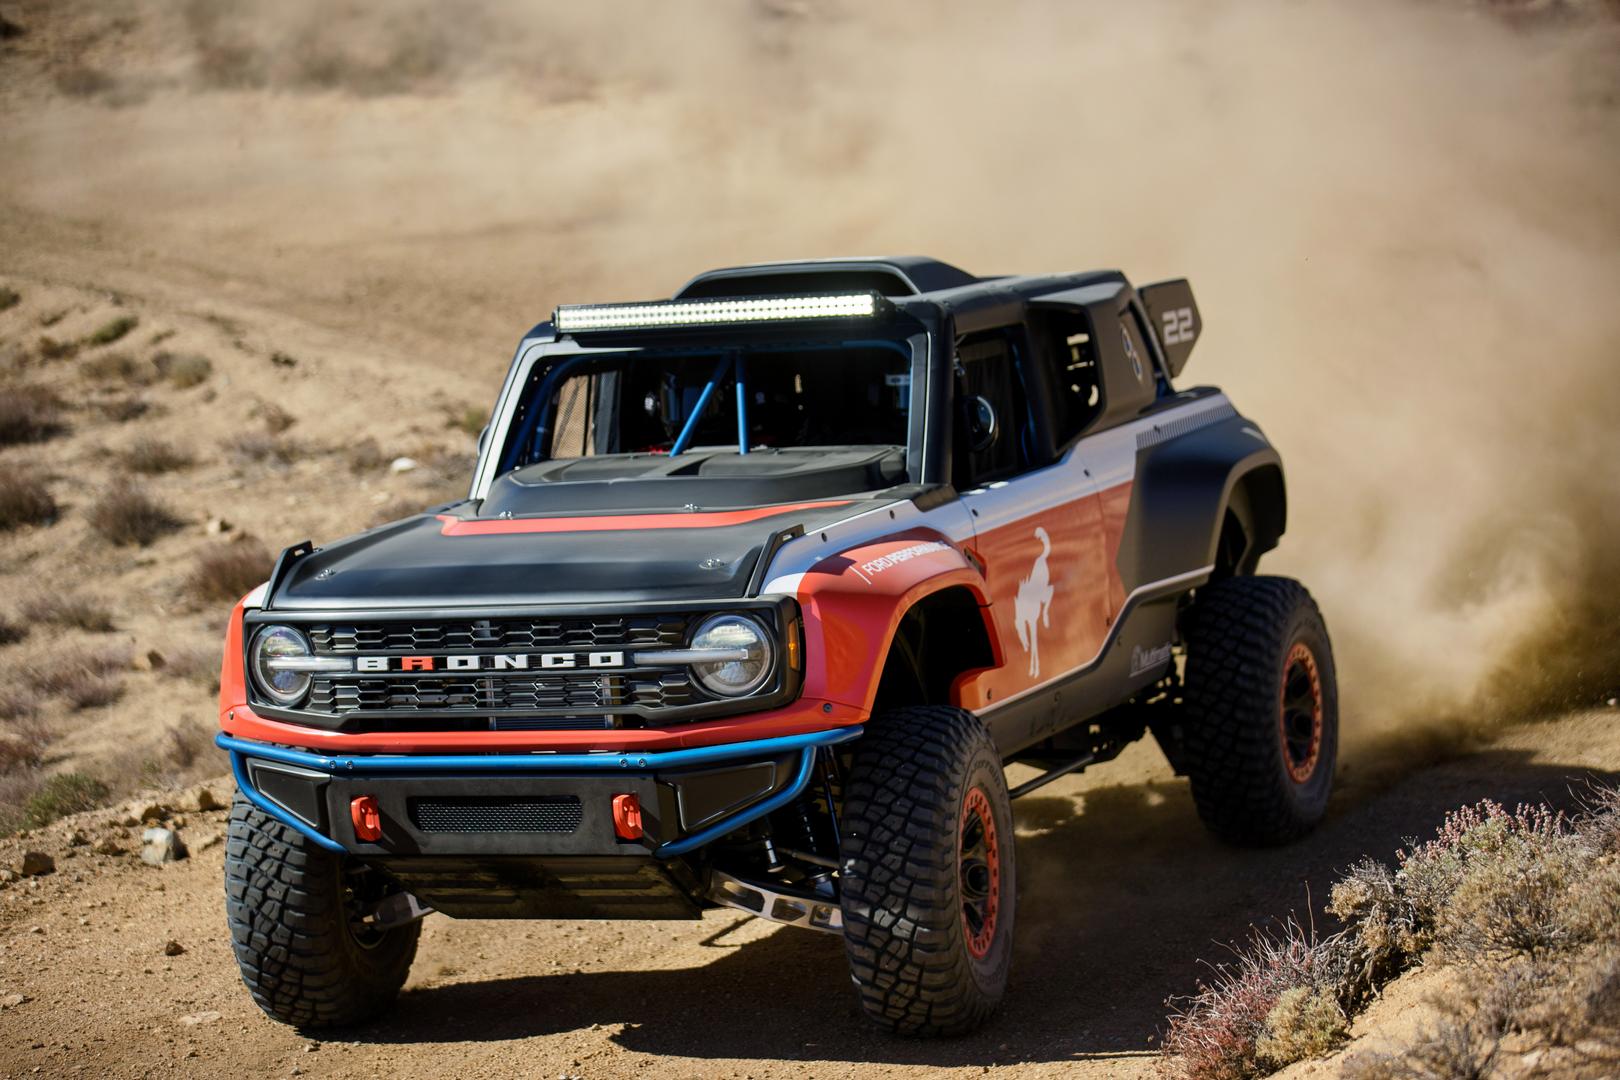 The V8 Bronco We’ve Been Waiting For: 2022 Ford Bronco DR, $200k Though